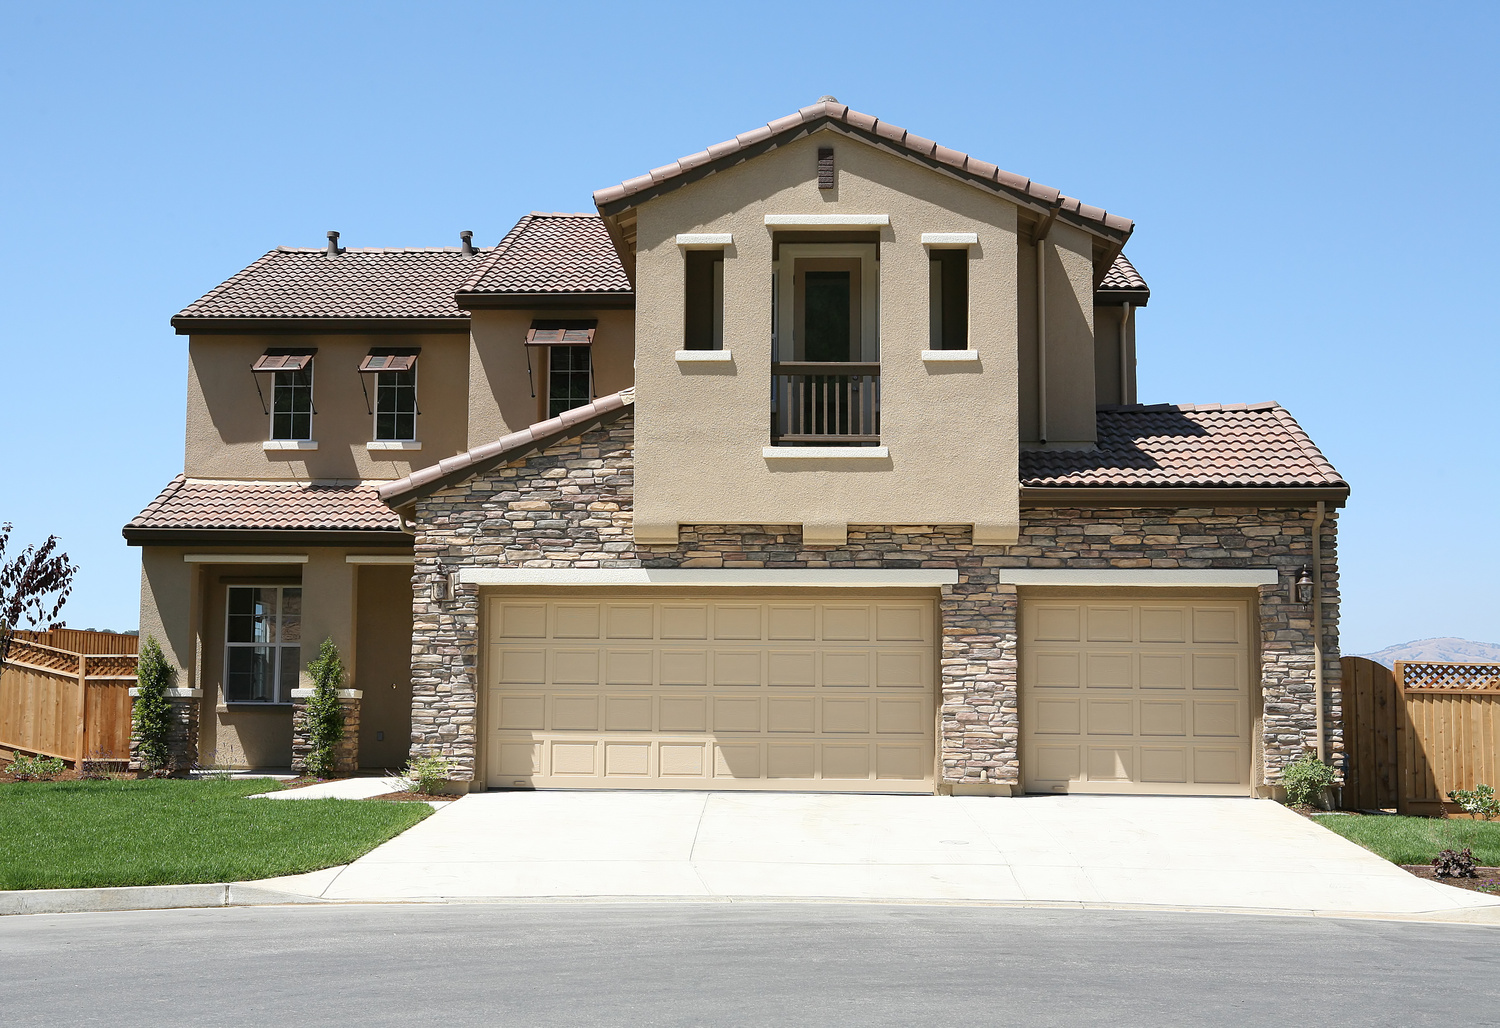 Discover the Timeless Elegance of Traditional Stucco Siding for Your Home